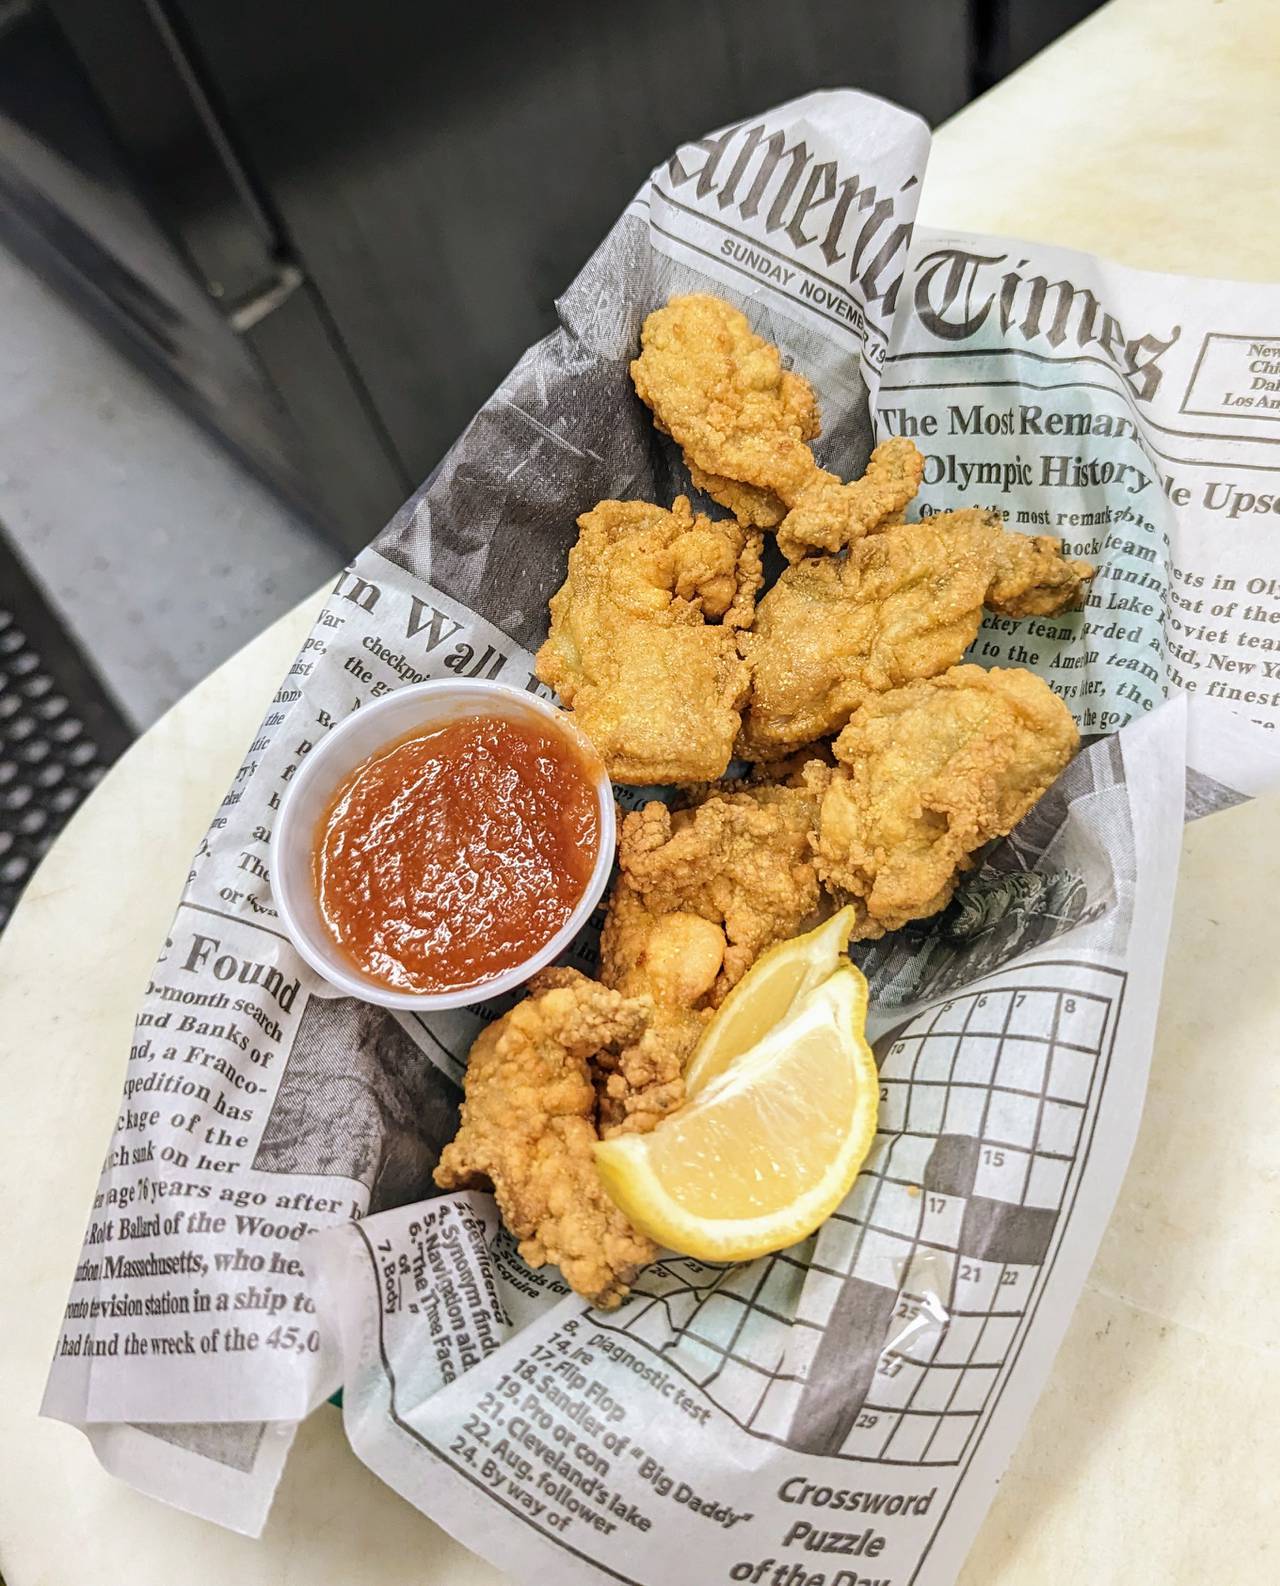 For a fritter, David White will shuck eight Patty’s Fatty’s, dropping them into a tray of seasoned meal where a quick roll turns the nectar into a thin batter. He’ll fry them, turn them into a paper-lined basket, and hand them over to you.